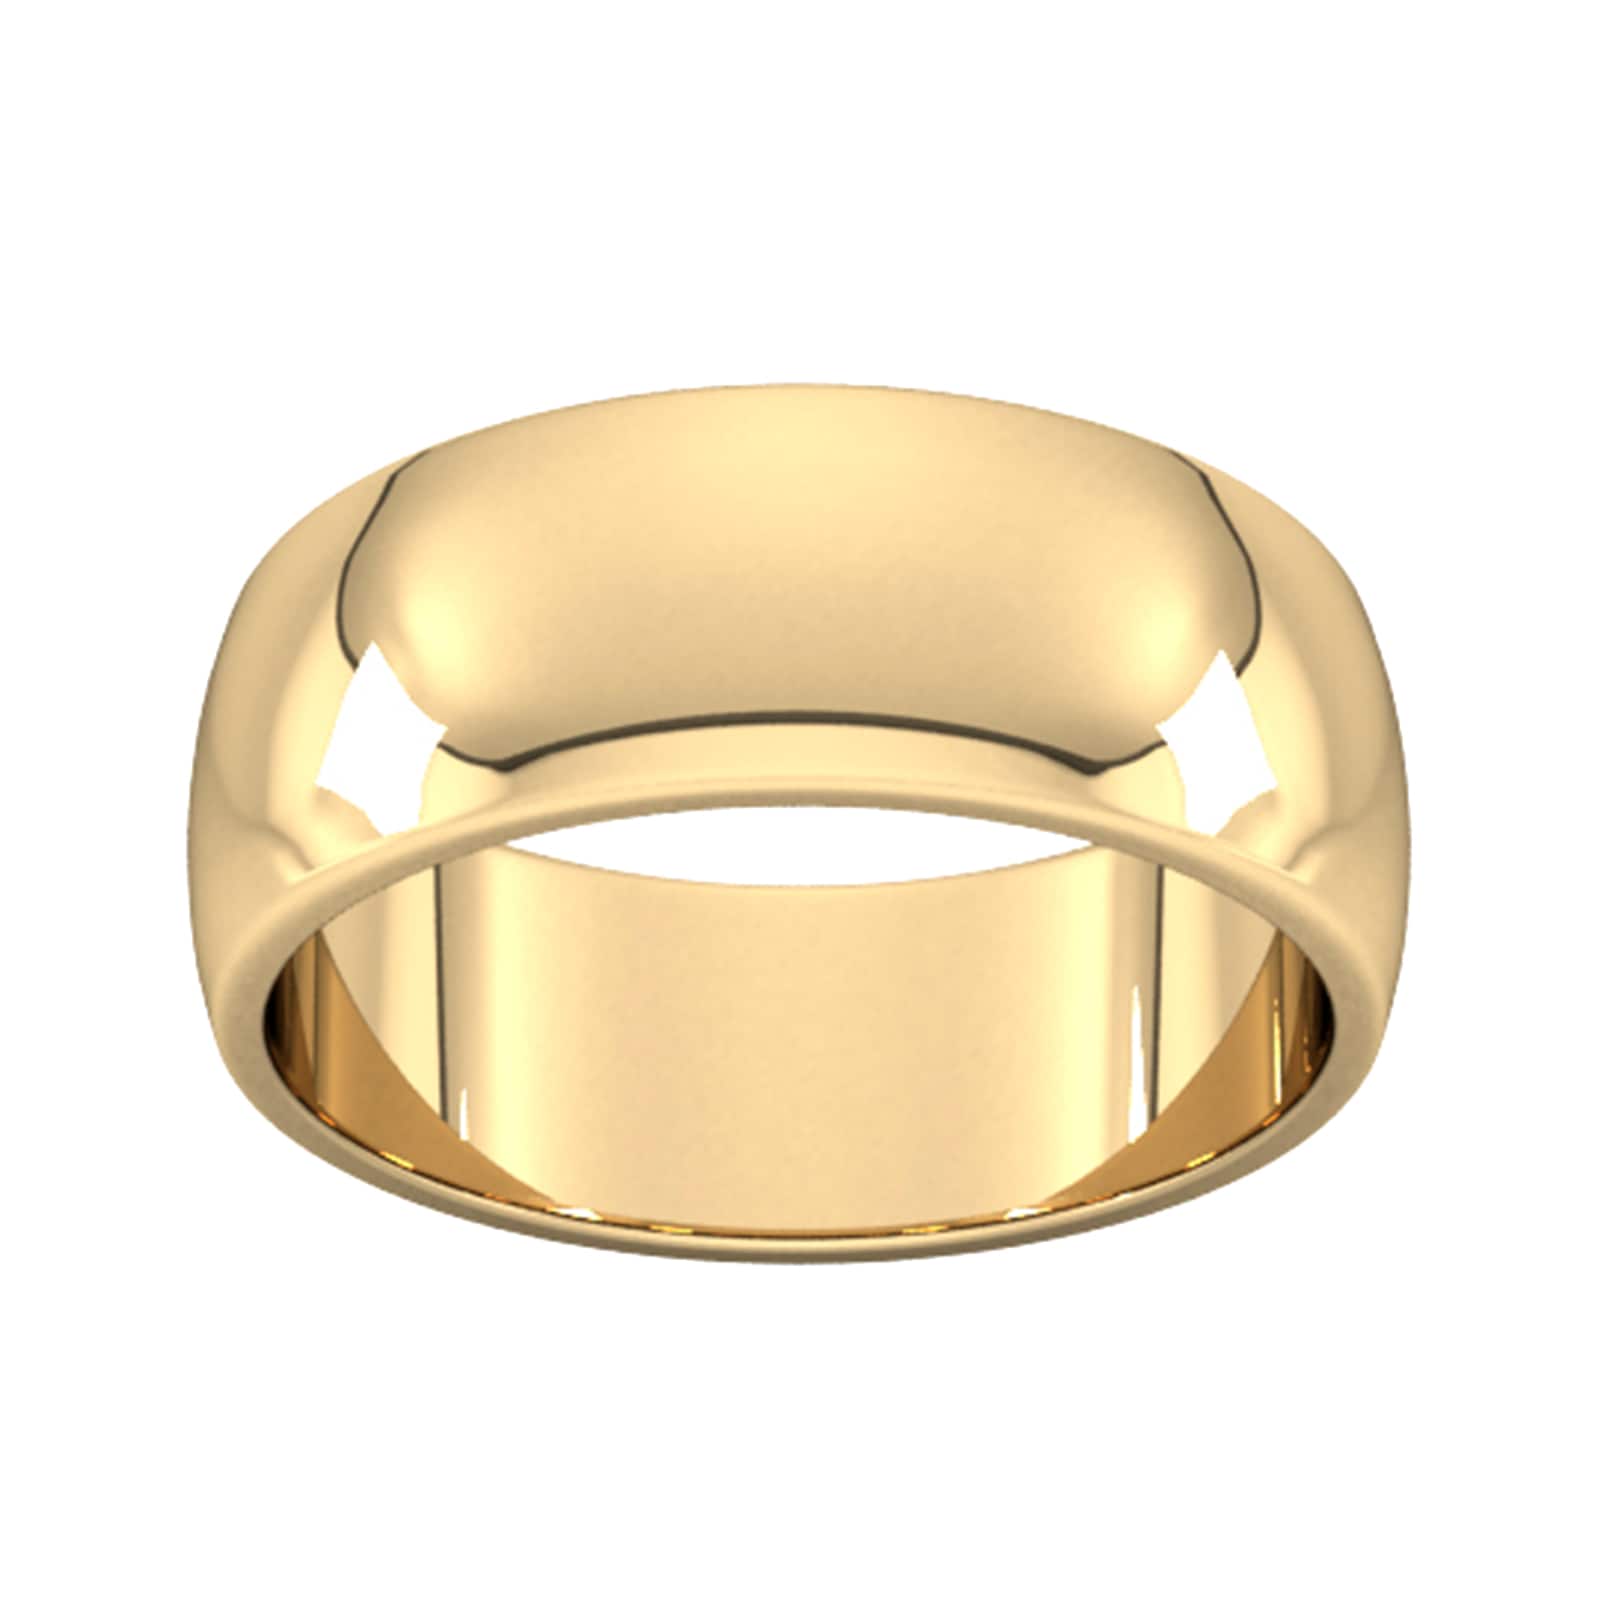 8mm D Shape Heavy Wedding Ring In 9 Carat Yellow Gold - Ring Size U